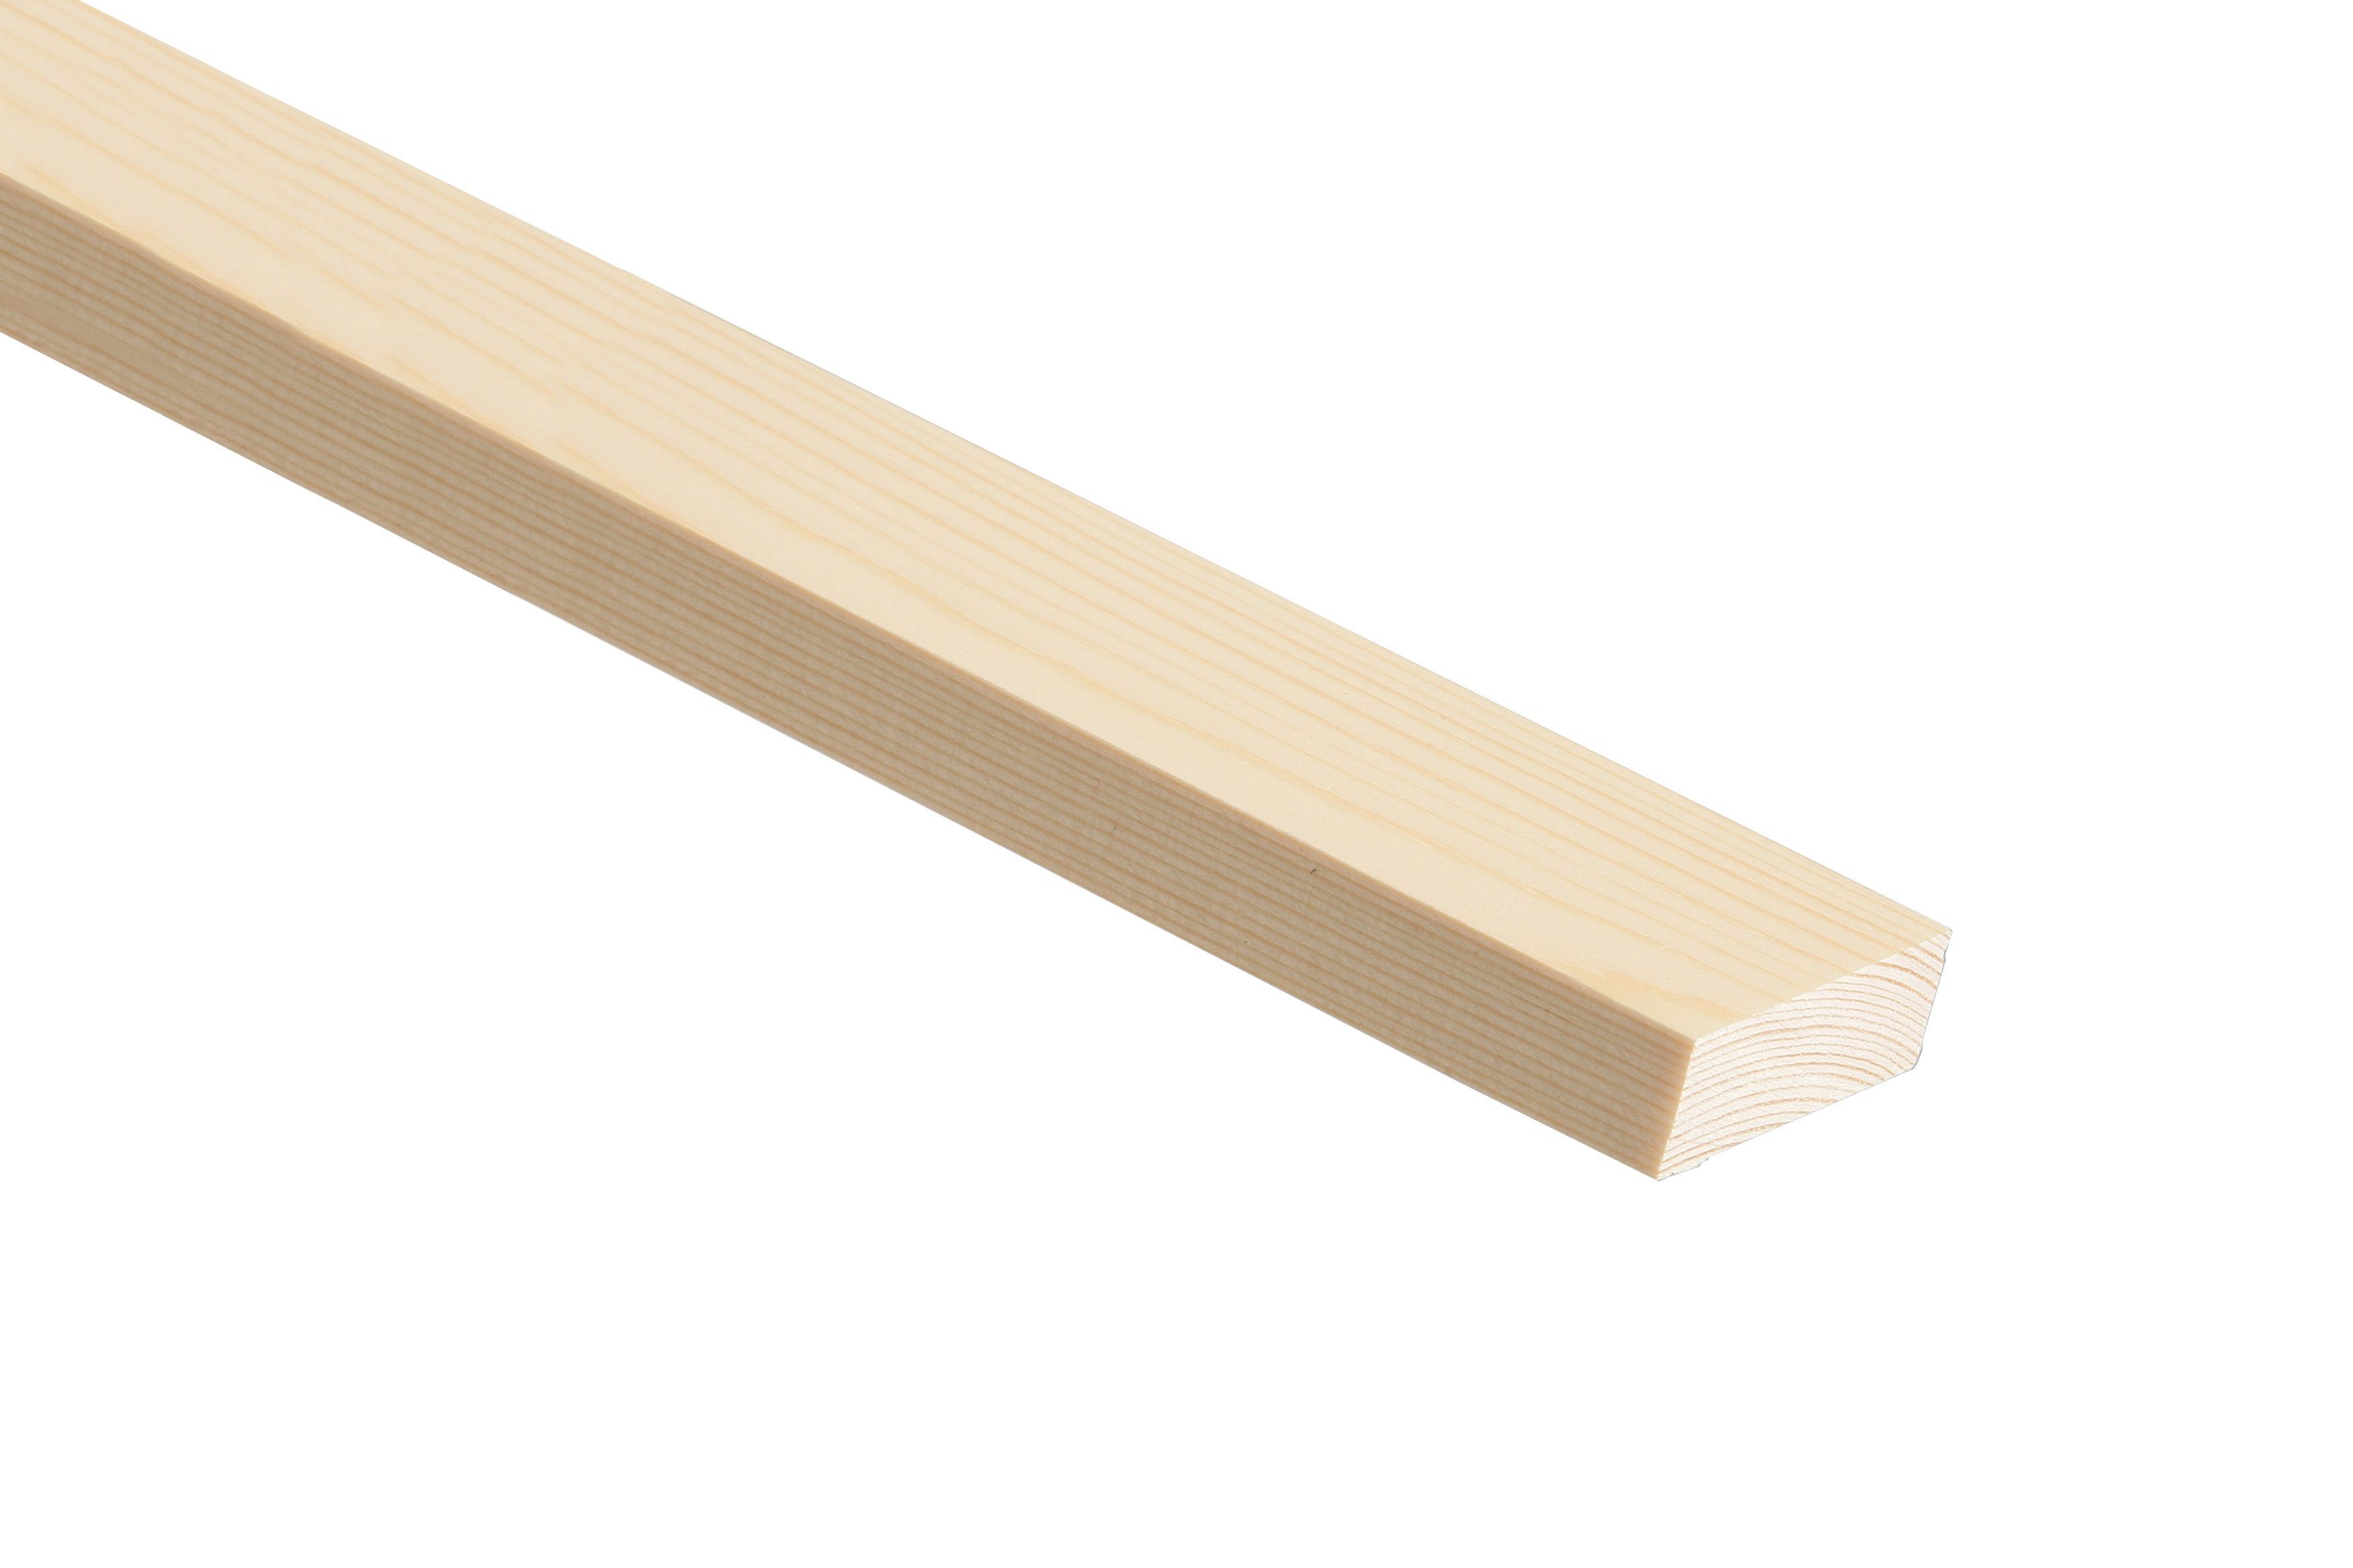 Image of Wickes Pine Stripwood Moulding (PSE) - 15 x 45 x 2400mm